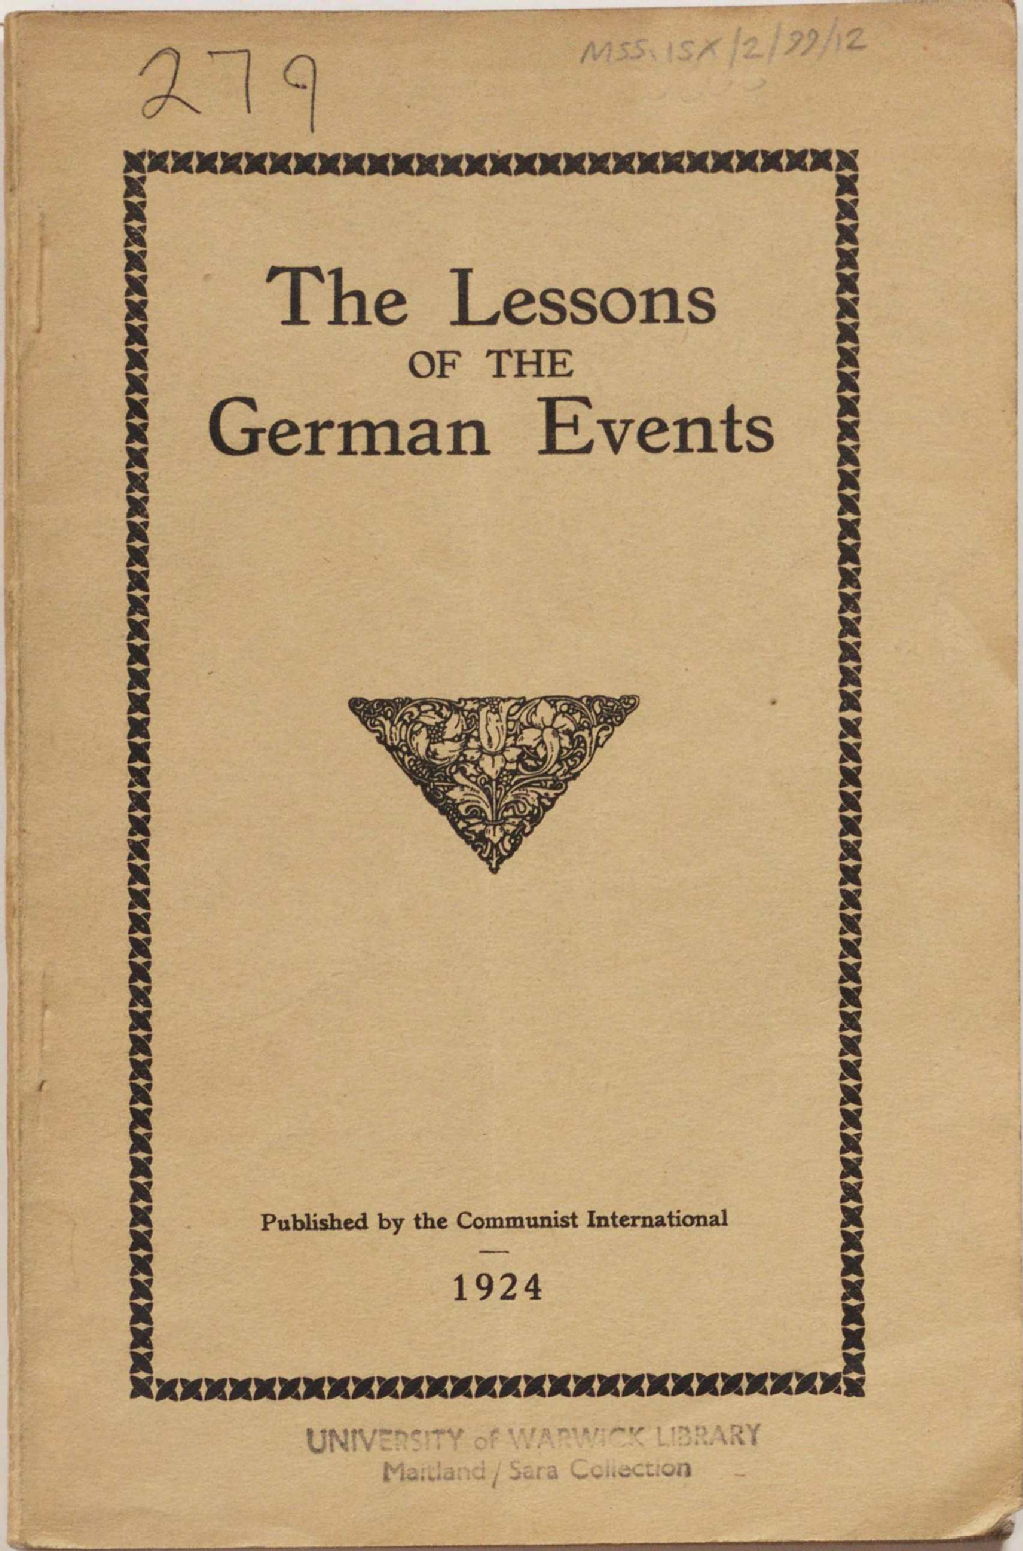 The lessons of the German events